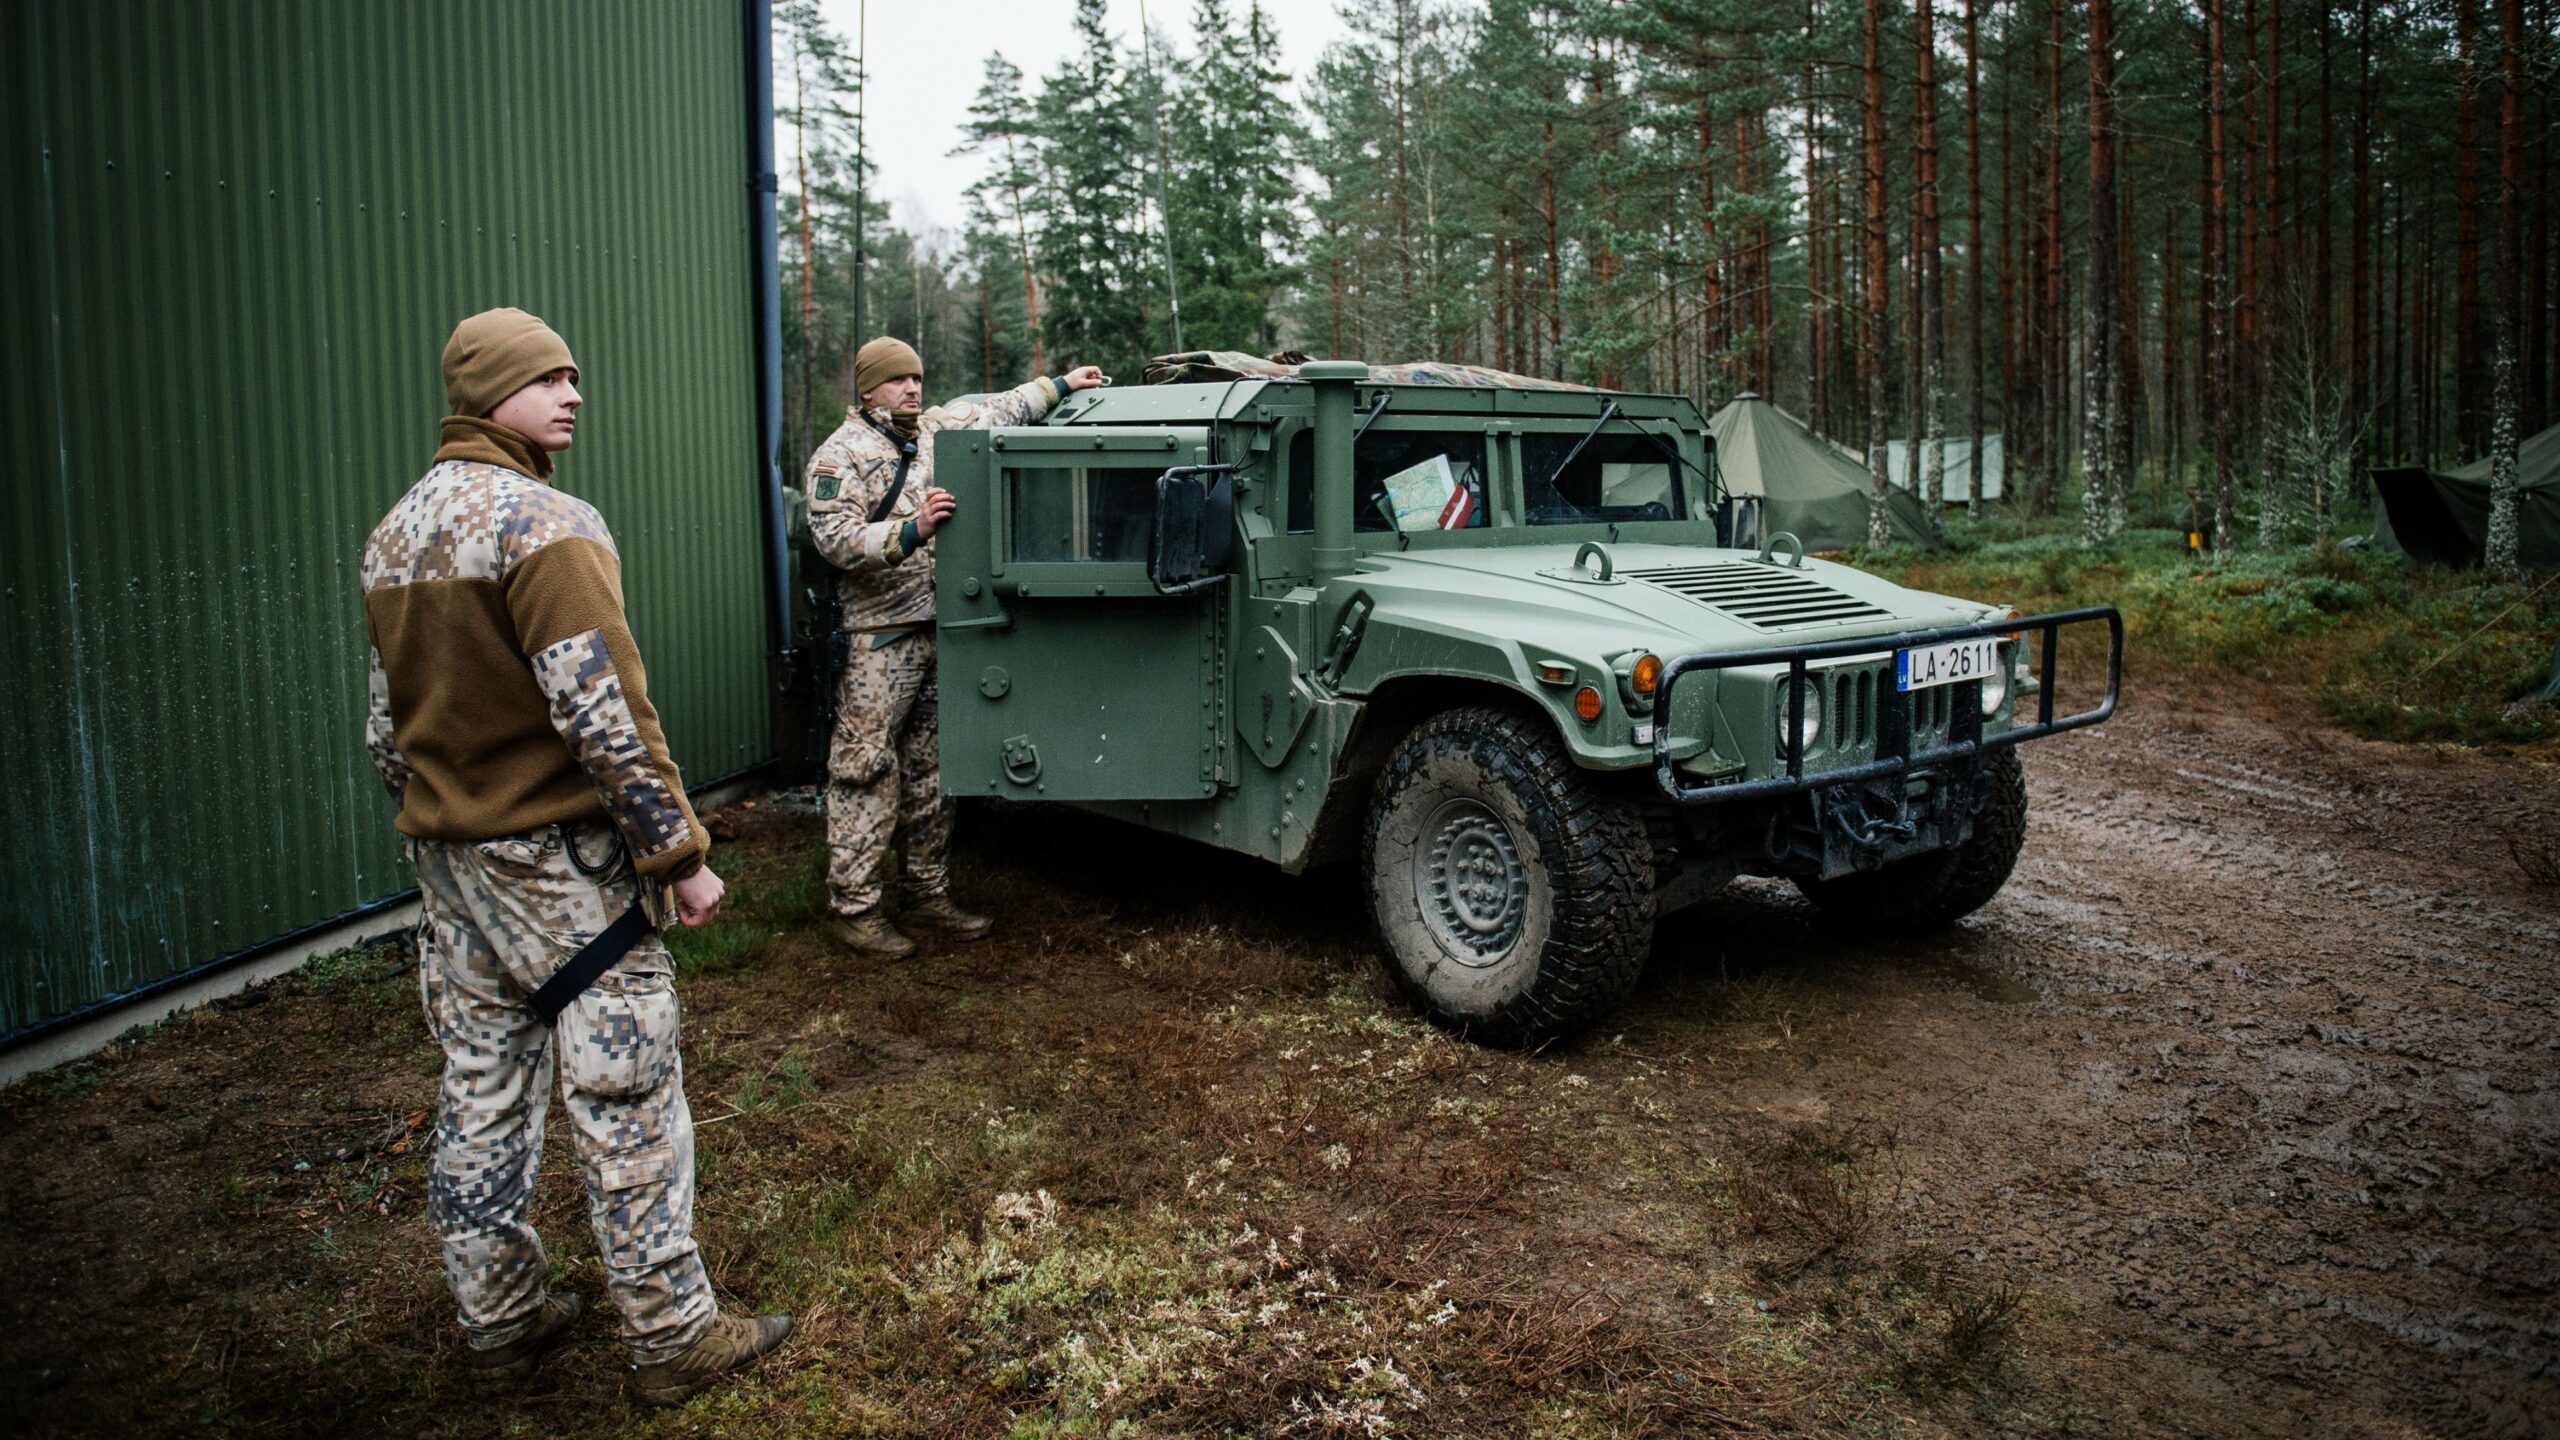 Soldiers from the Latvian National Armed Forces stand next to an armored Hummer vehicle